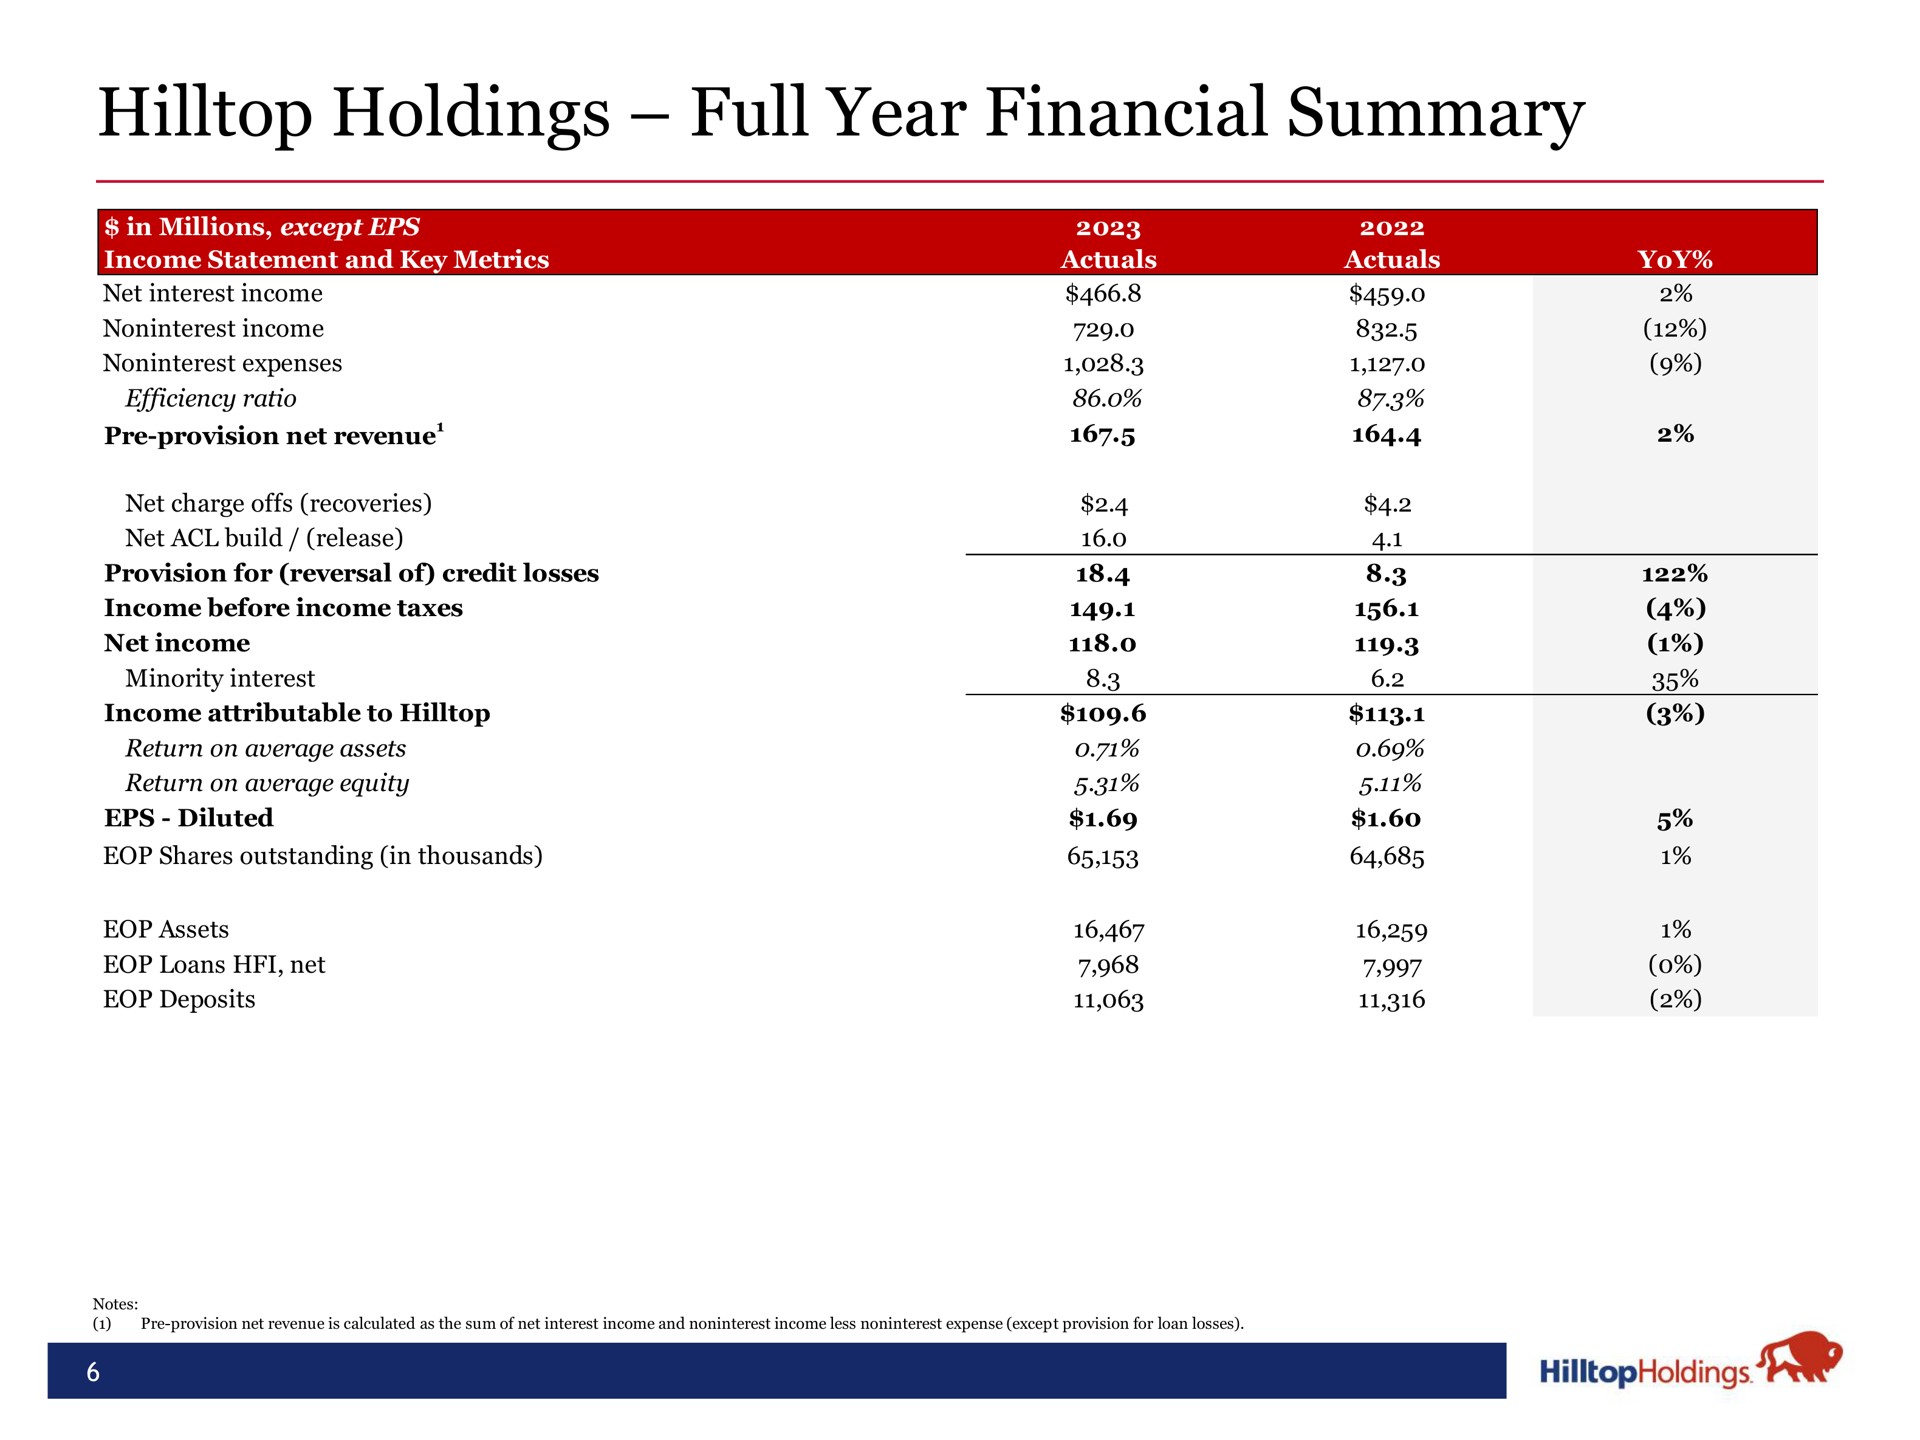 hilltop holdings full year financial summary | Hilltop Holdings